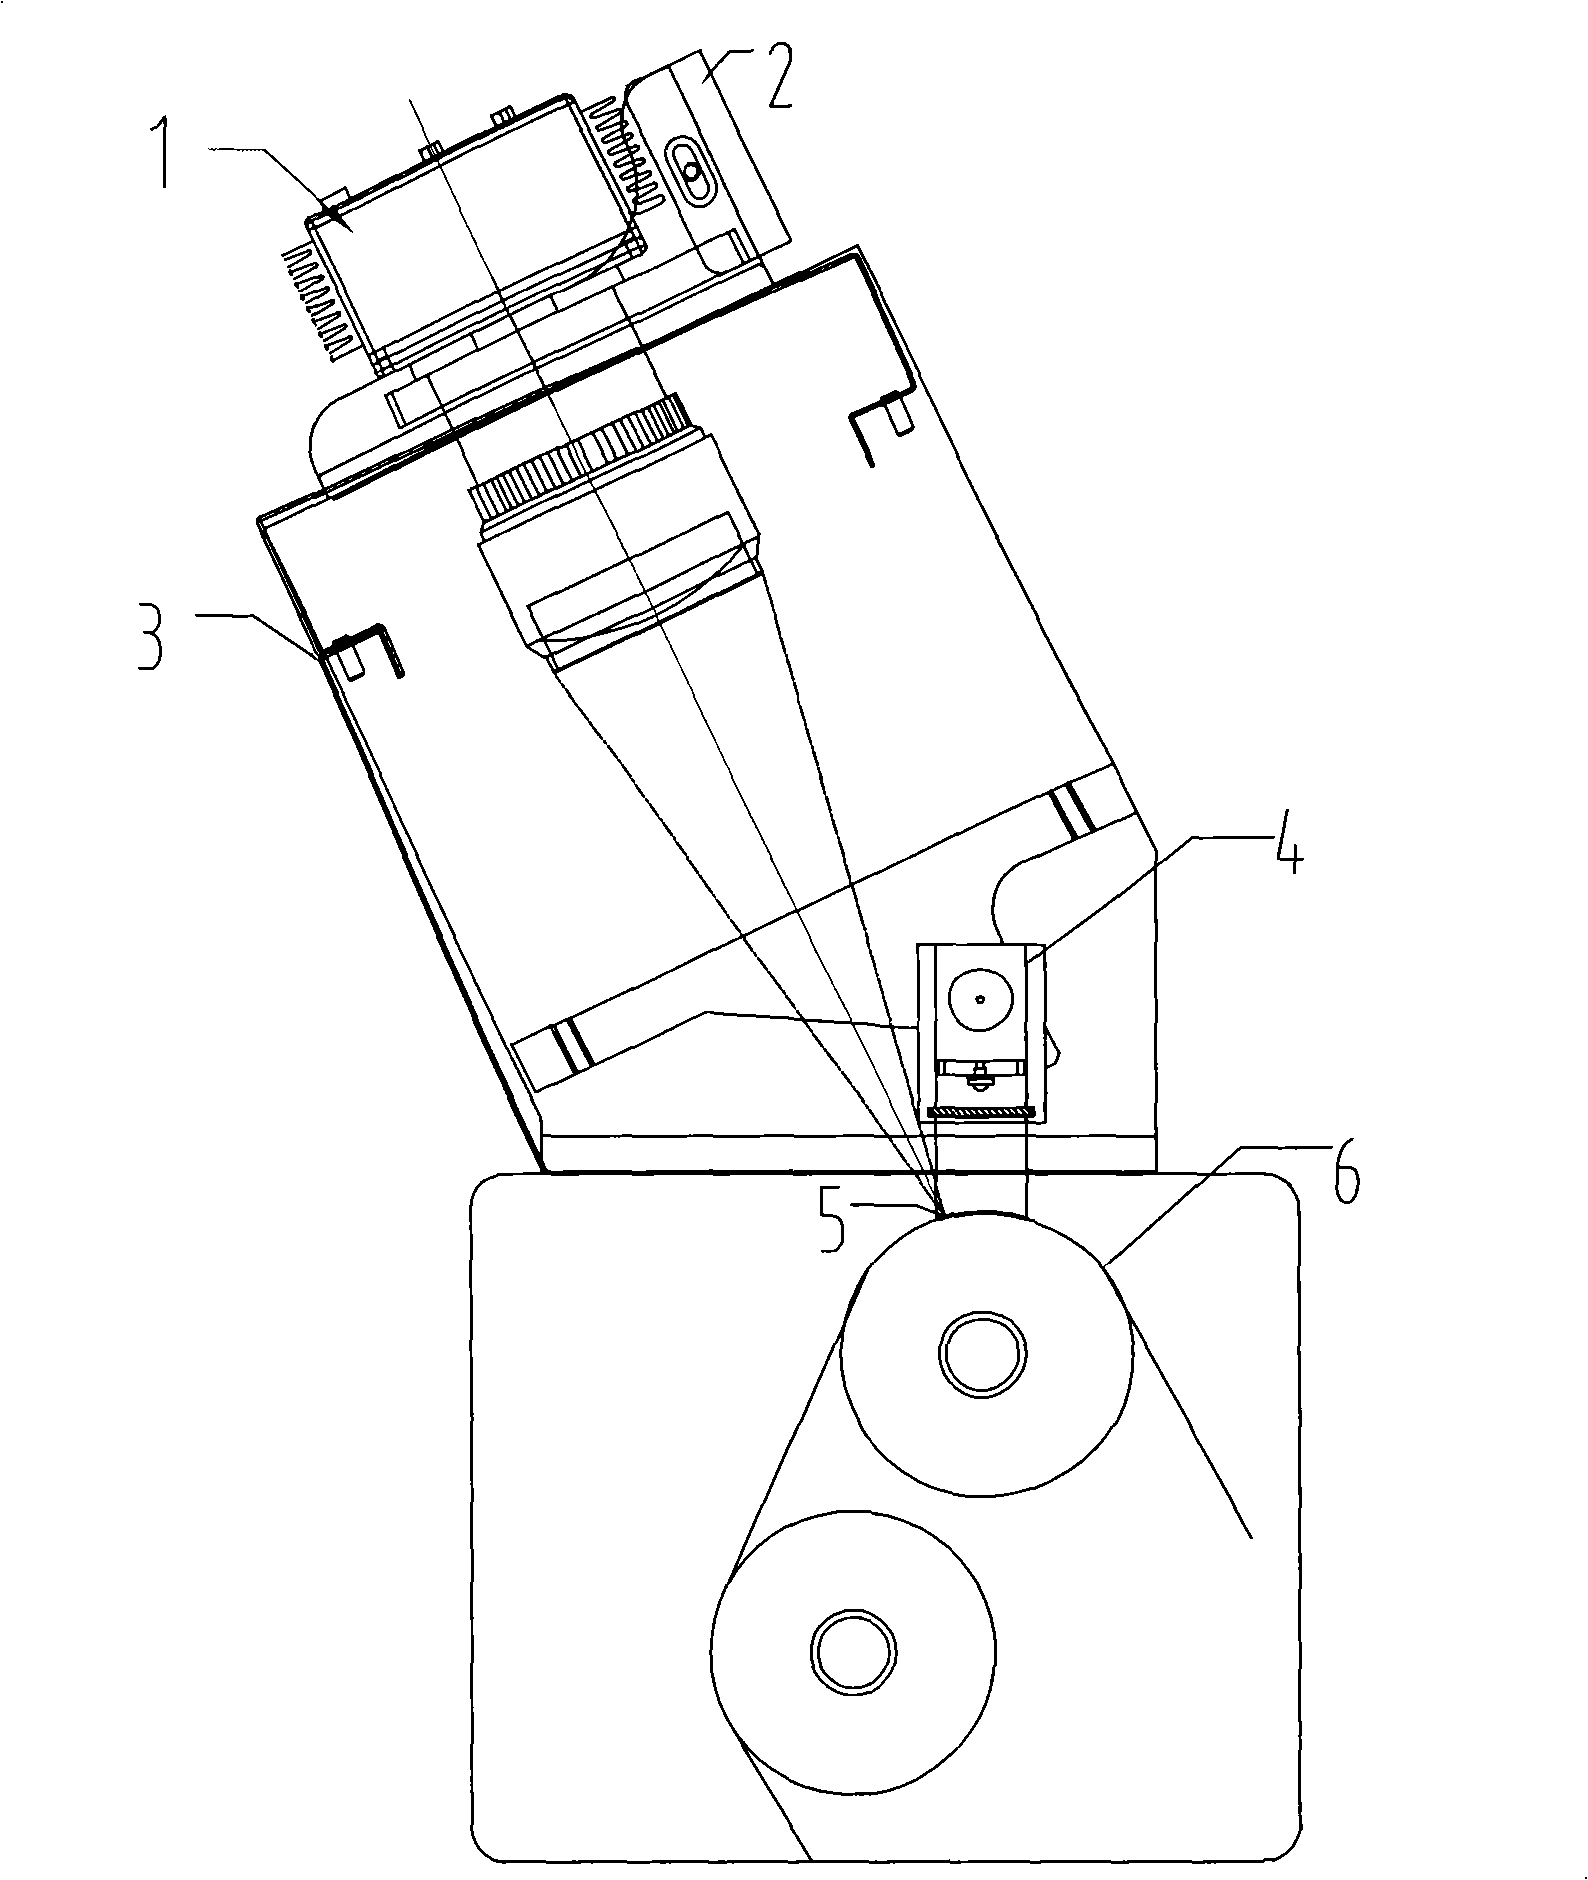 Laser printing quality checking system and method based on CCD image-forming